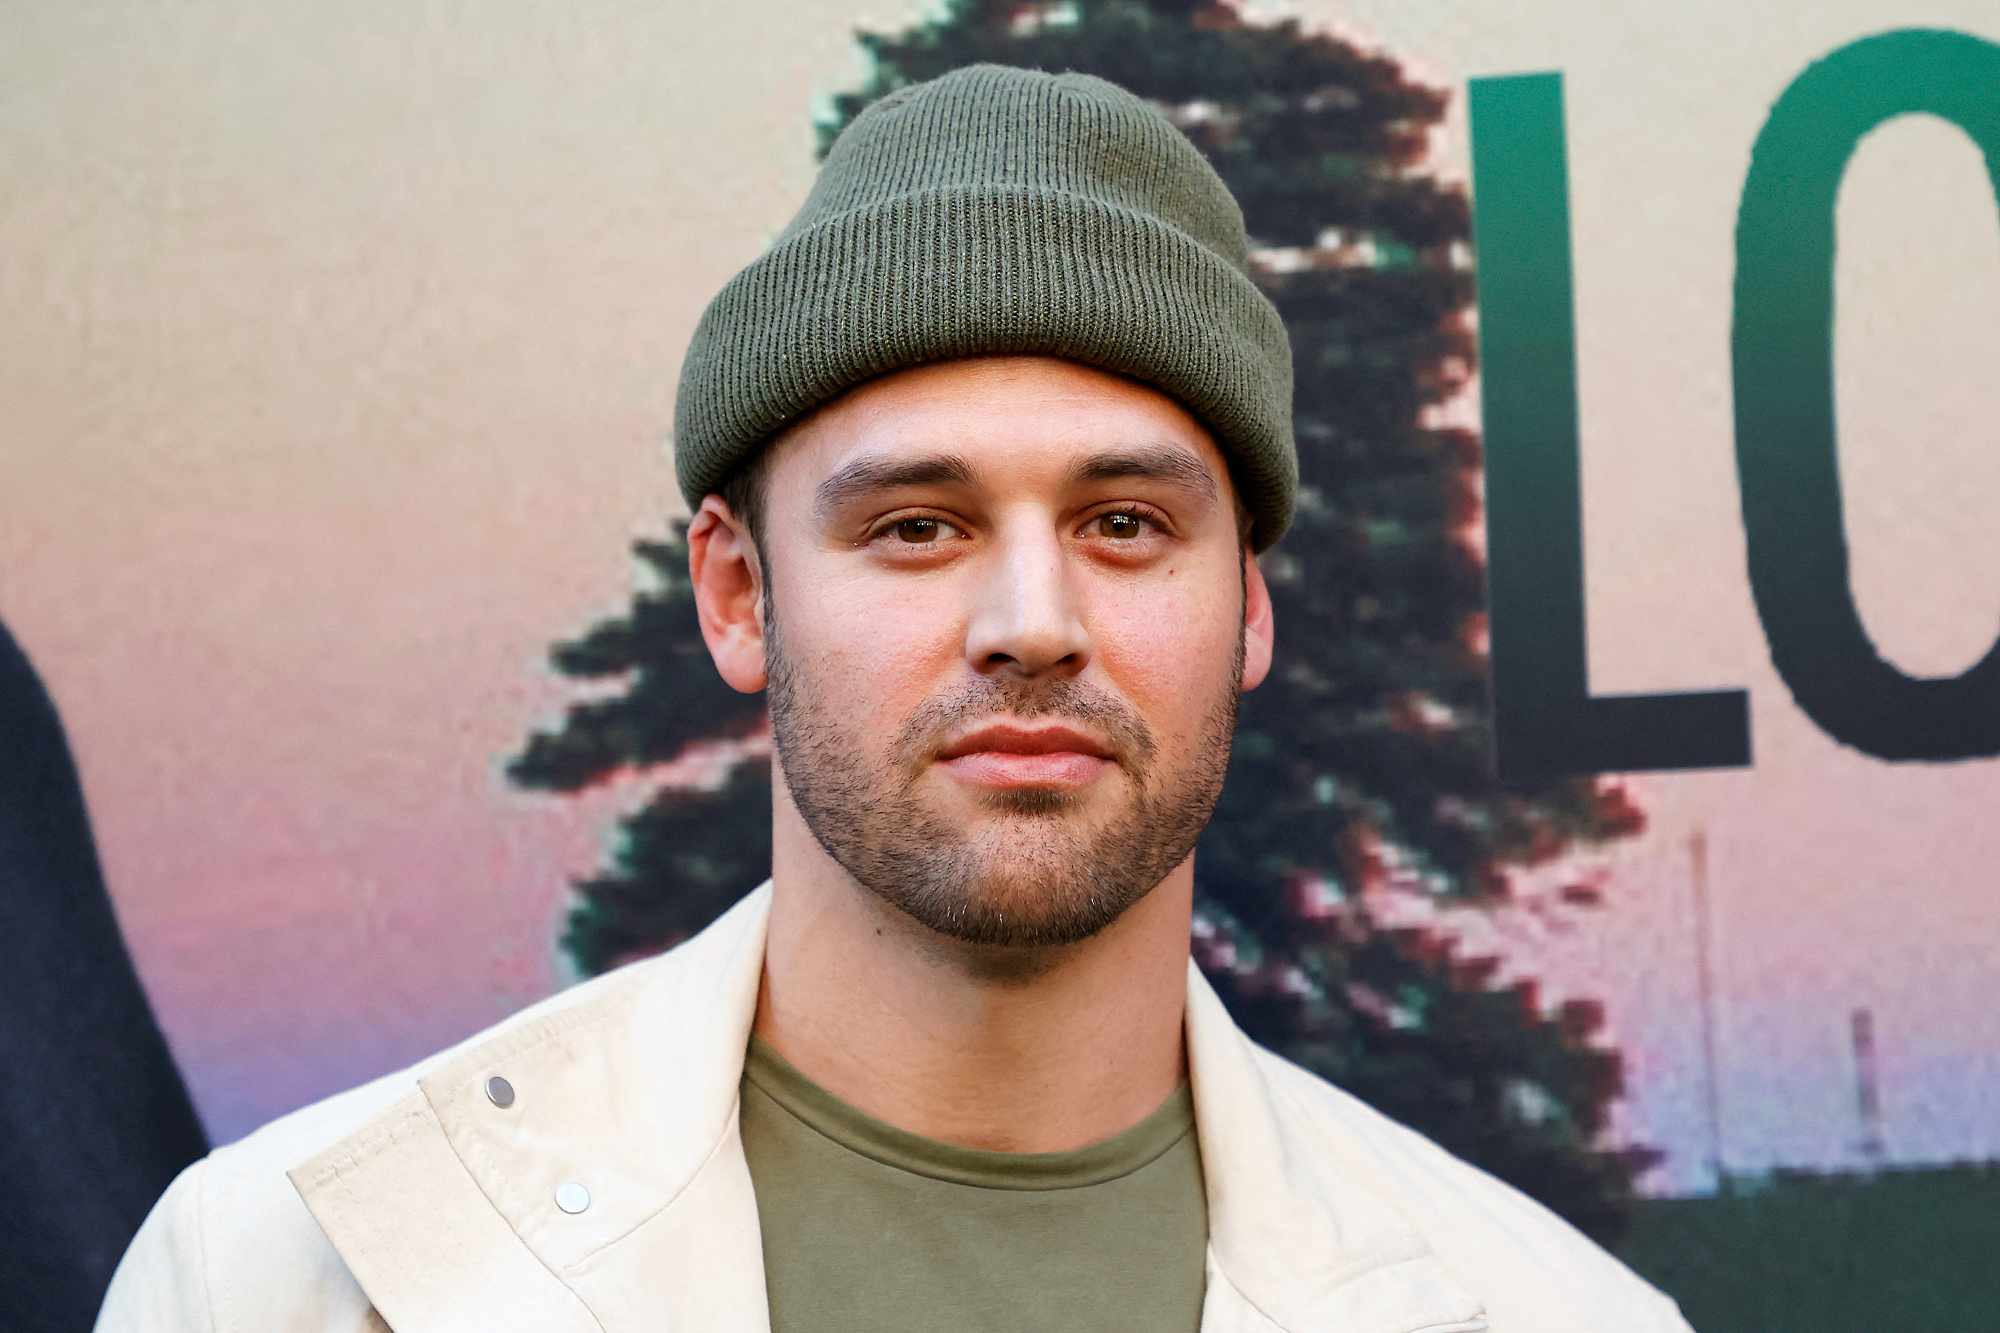 “9-1-1”'s Ryan Guzman opens up about suicide attempt, urges men to seek help: 'Lean on your brother'